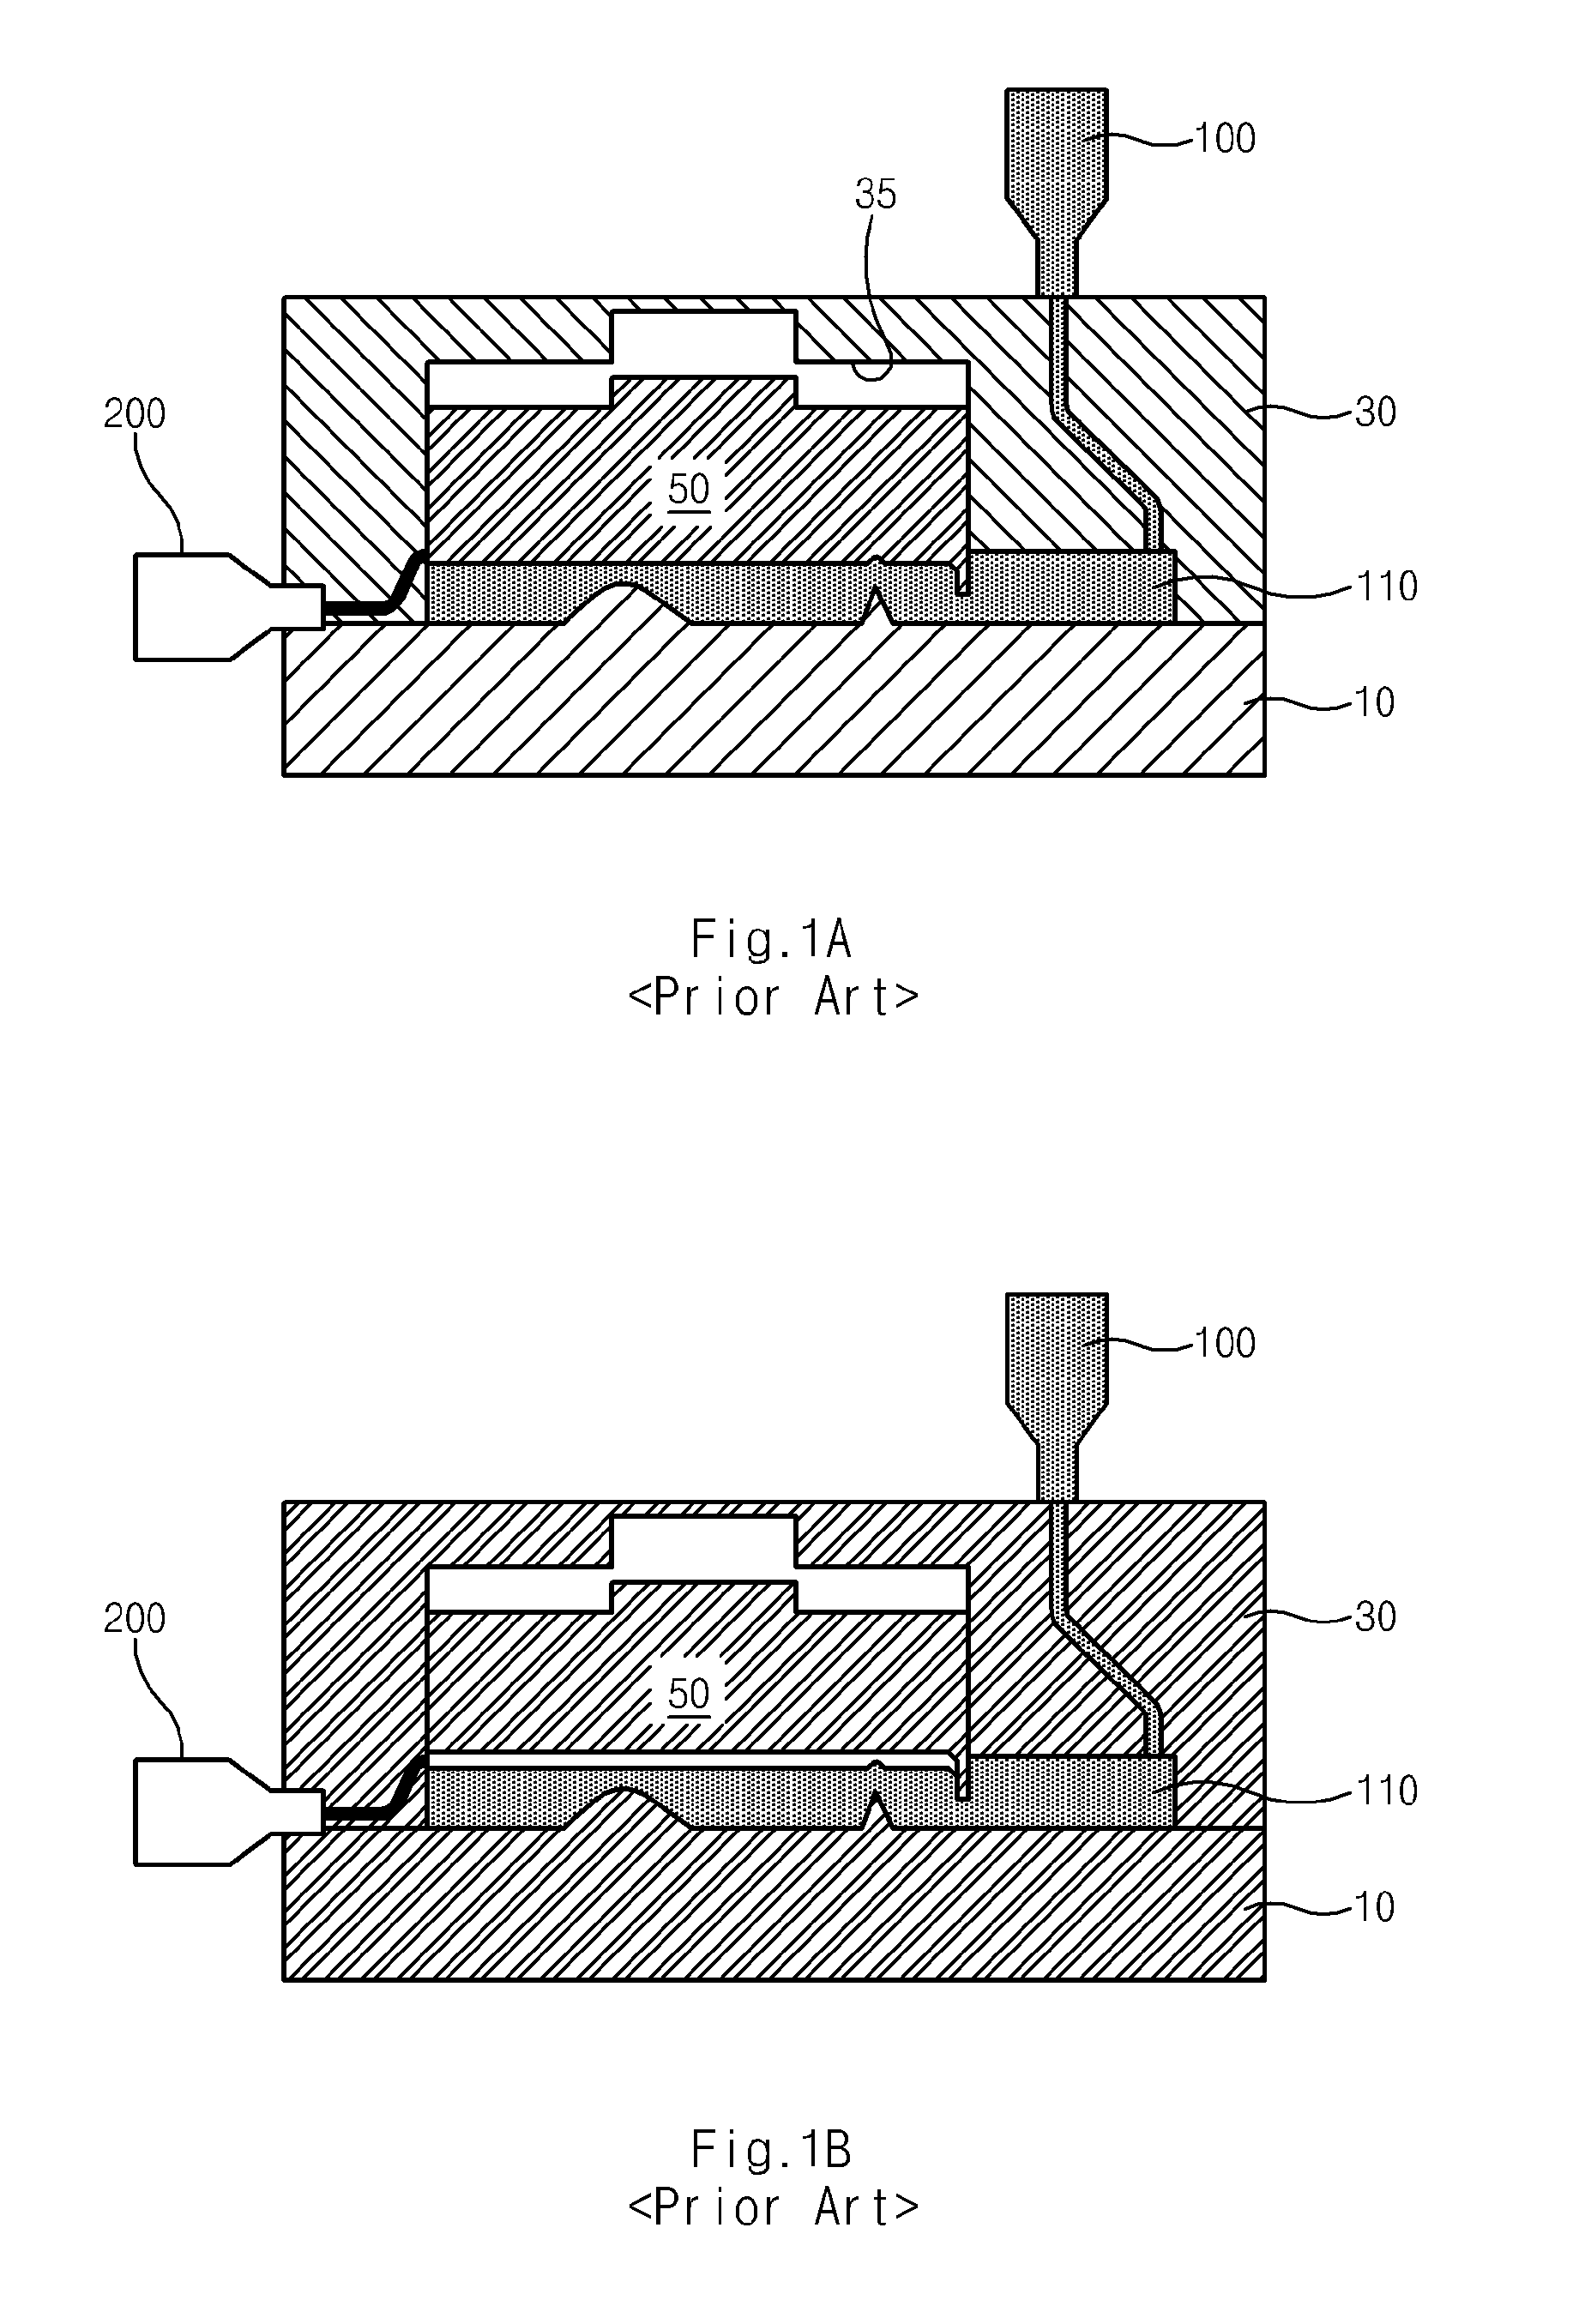 Localized over-molding die structure